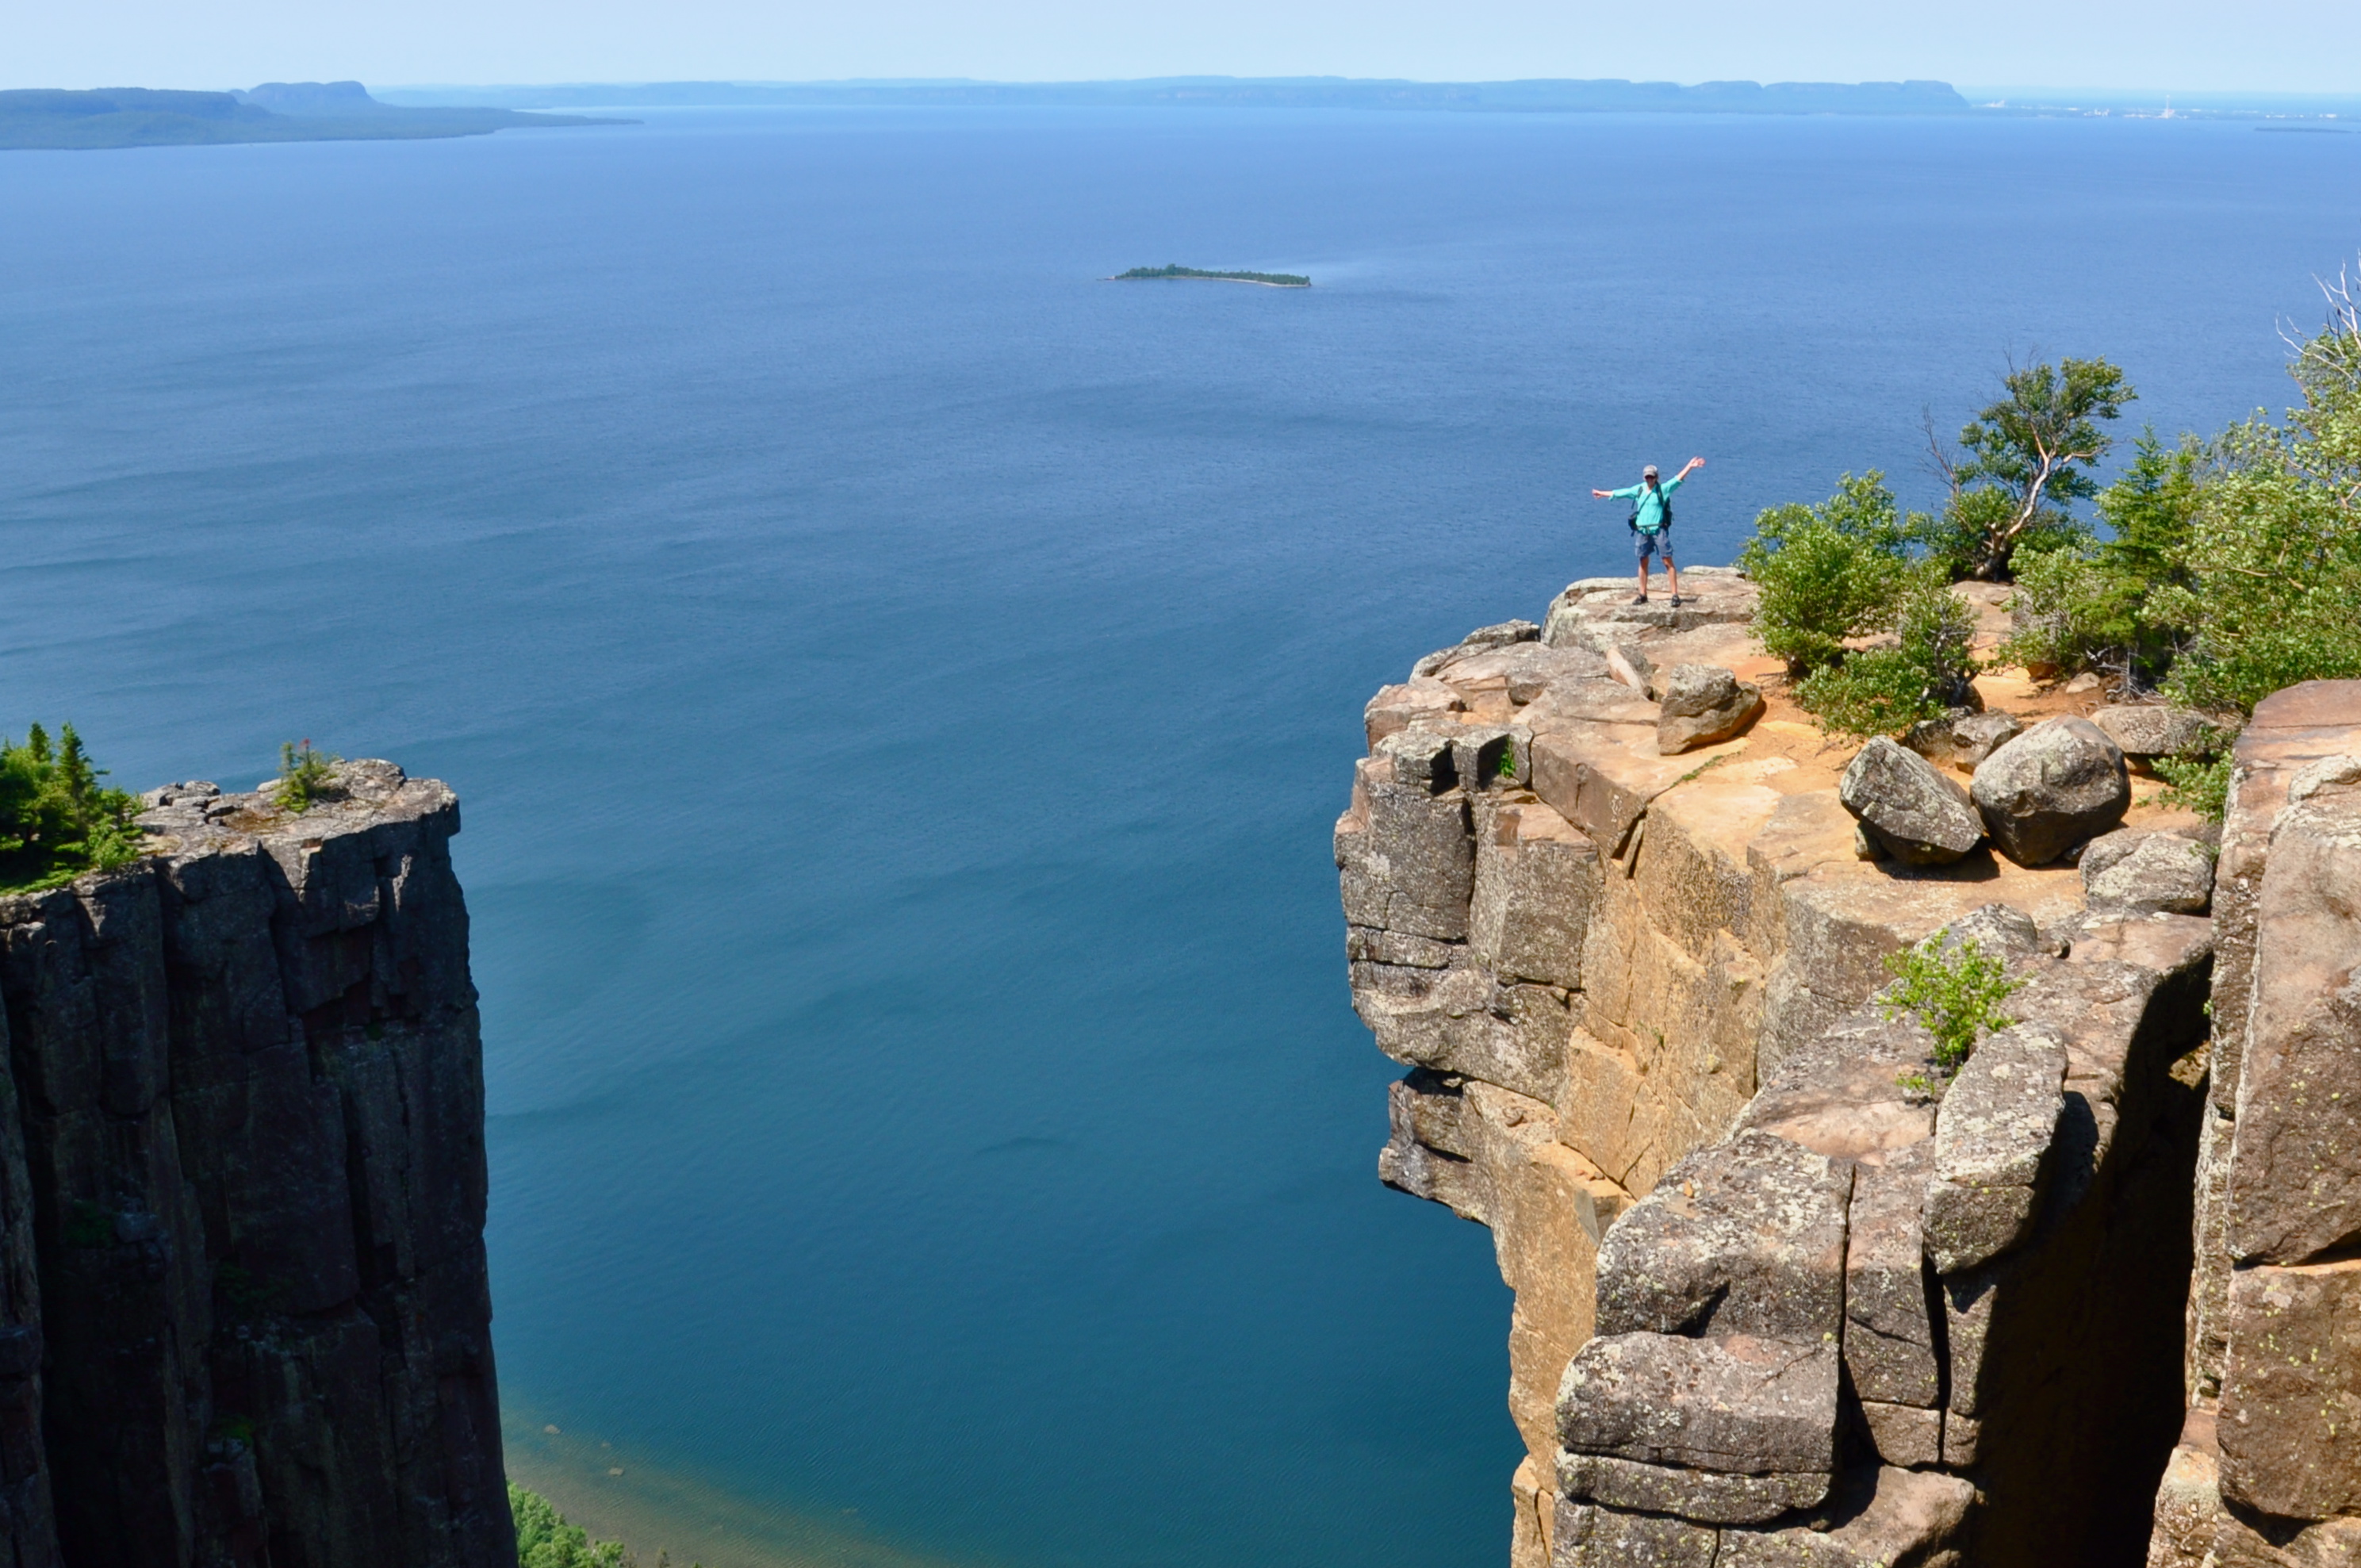 How To Have A Great Day in Thunder Bay, Ontario